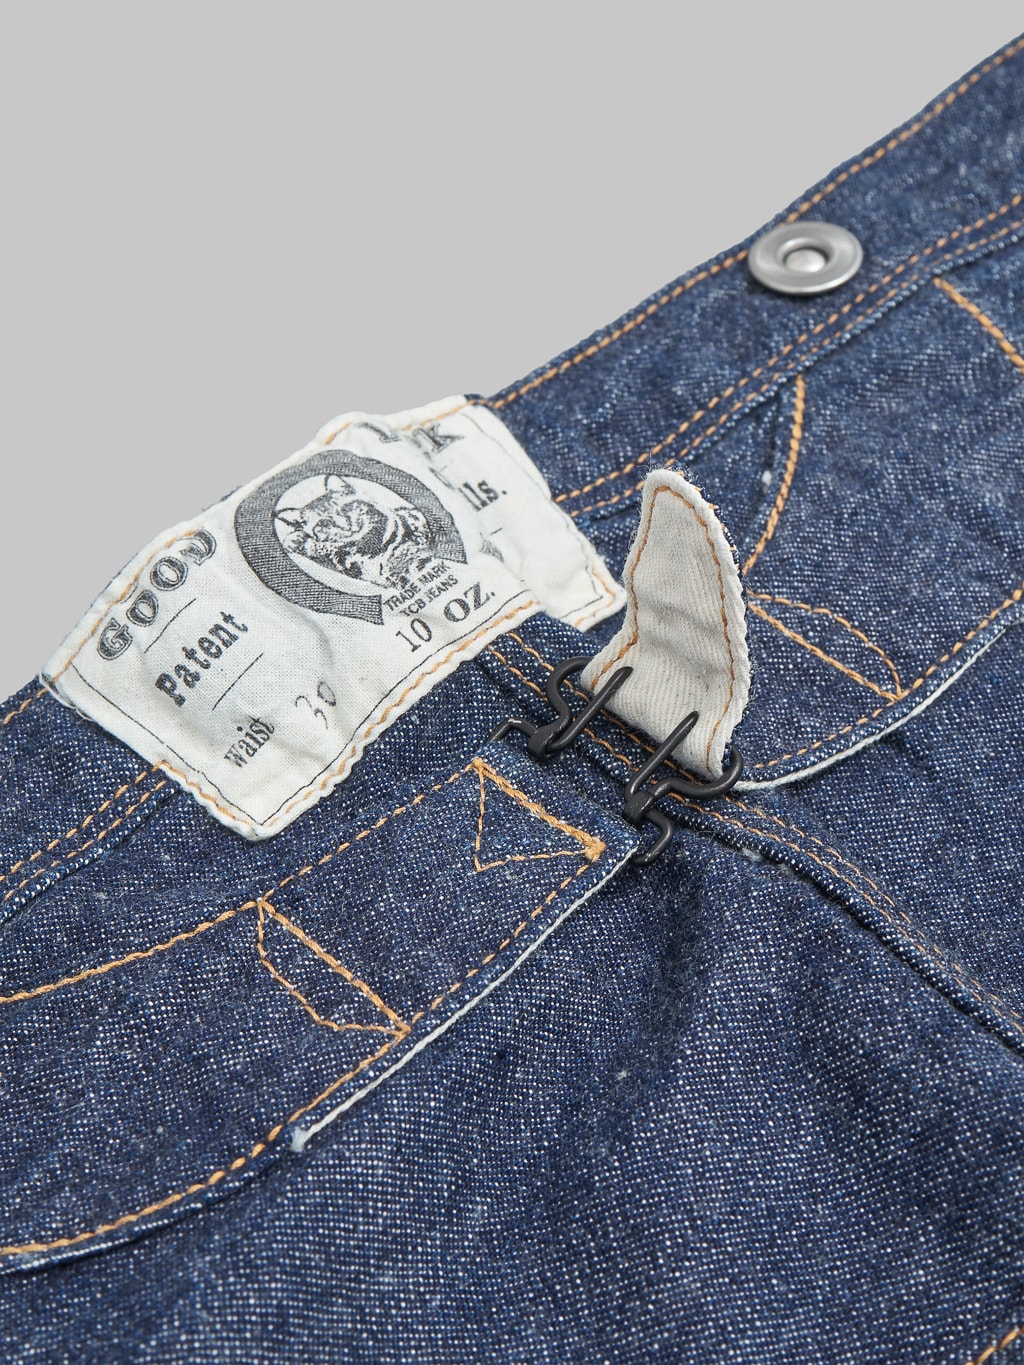 TCB Good Luck Wide Straight Jeans details